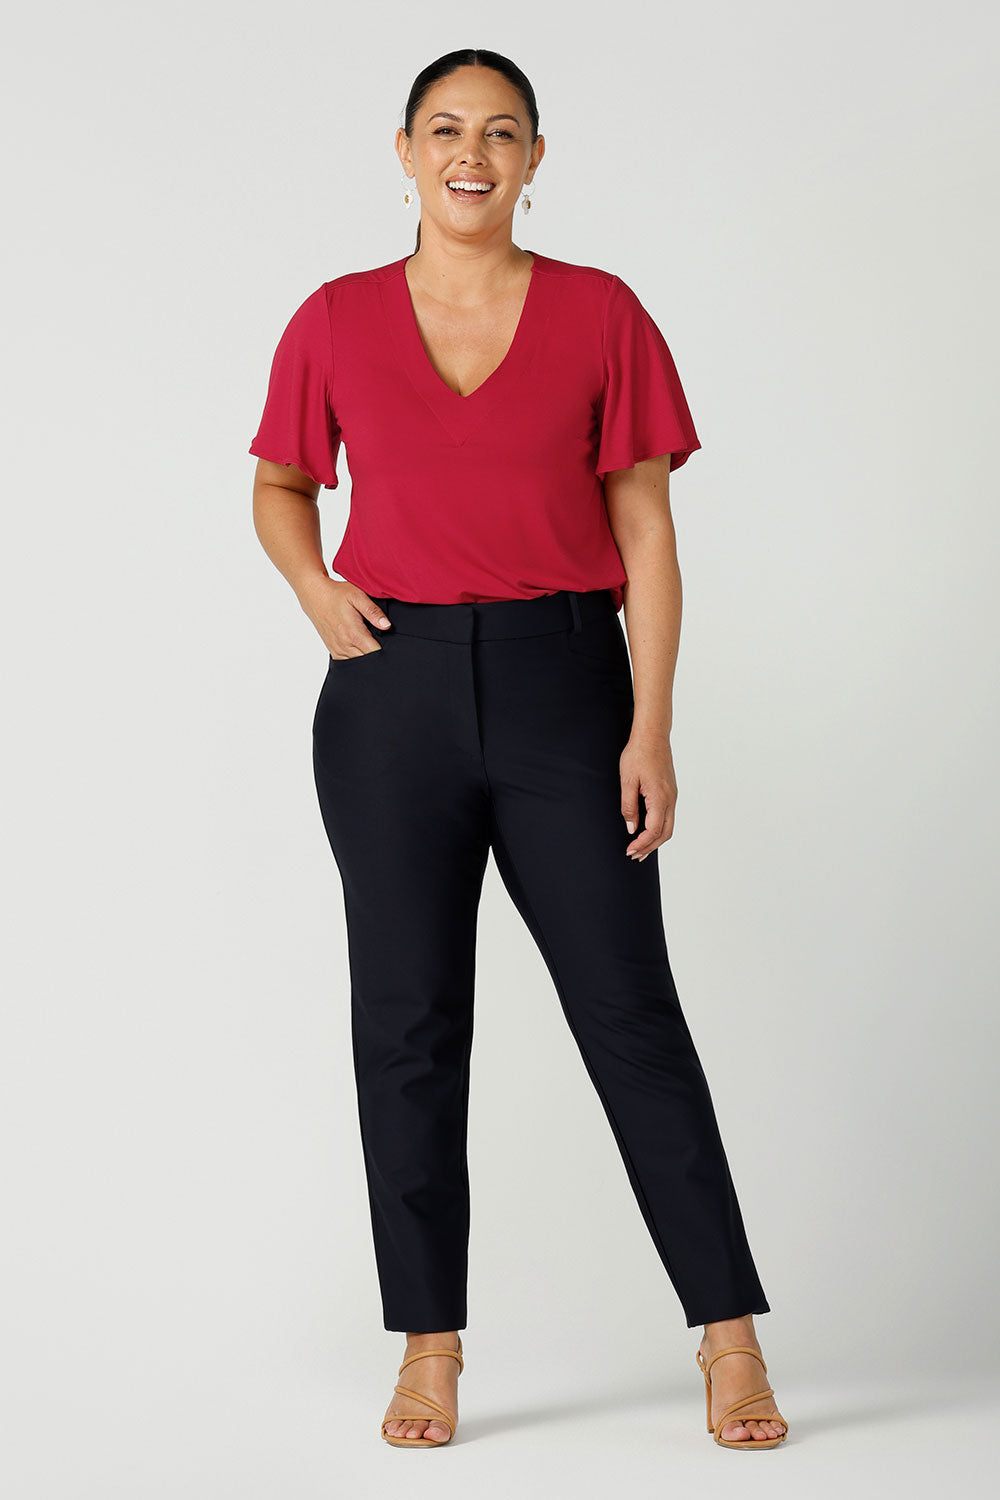 A size 12 woman wears Lulu cigarette pants in navy ponte with a matching jacket. A comfortable tailored work pant with fly front and belt loops. Styled back with a Lila top in red bamboo. A great office look for the festive season. Made in Australia for women sizes 8 - 24.